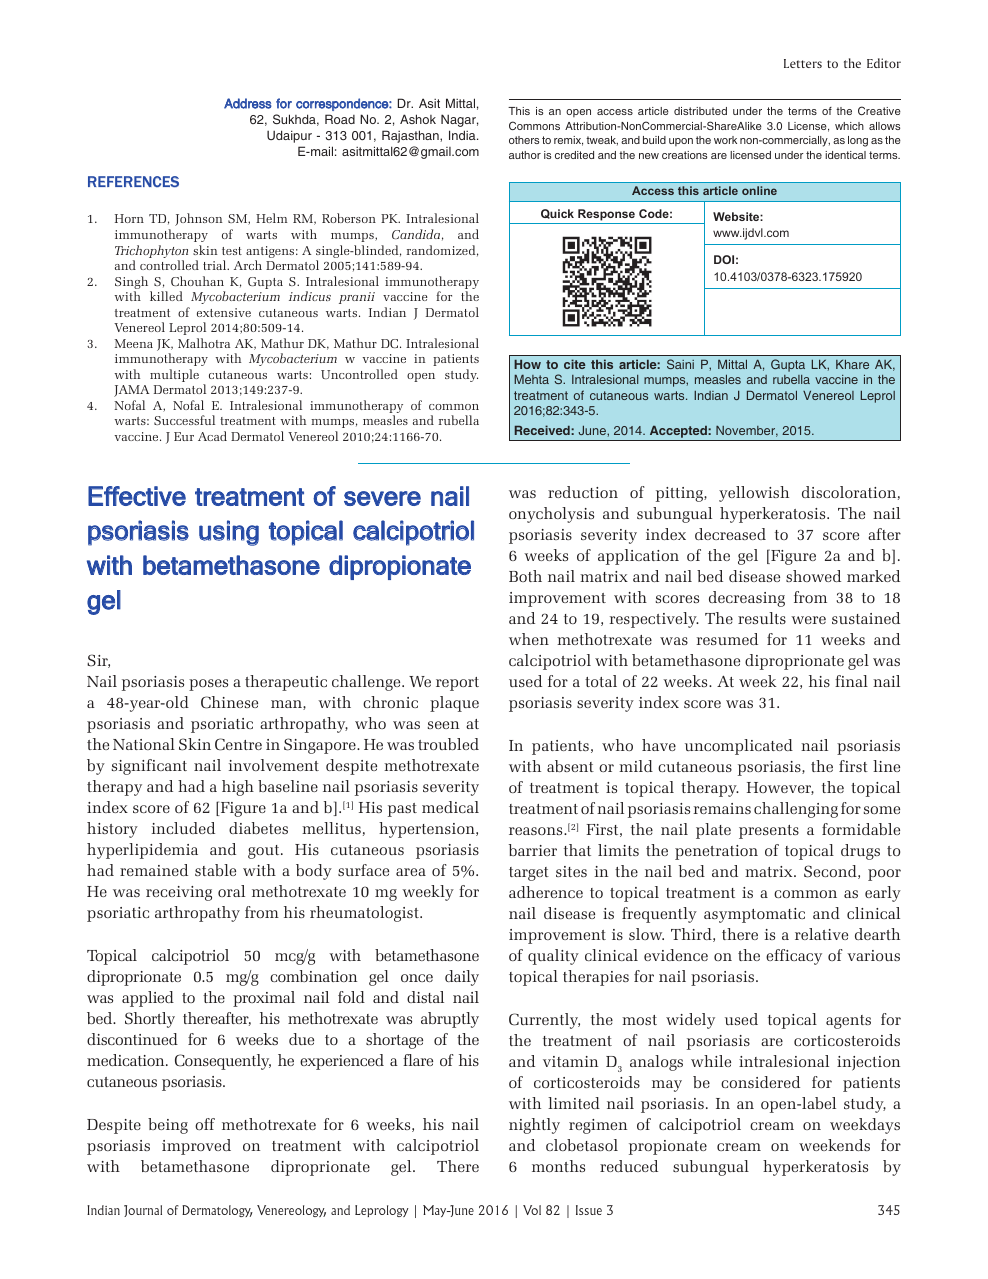 Effective Treatment Of Severe Nail Psoriasis Using Topical